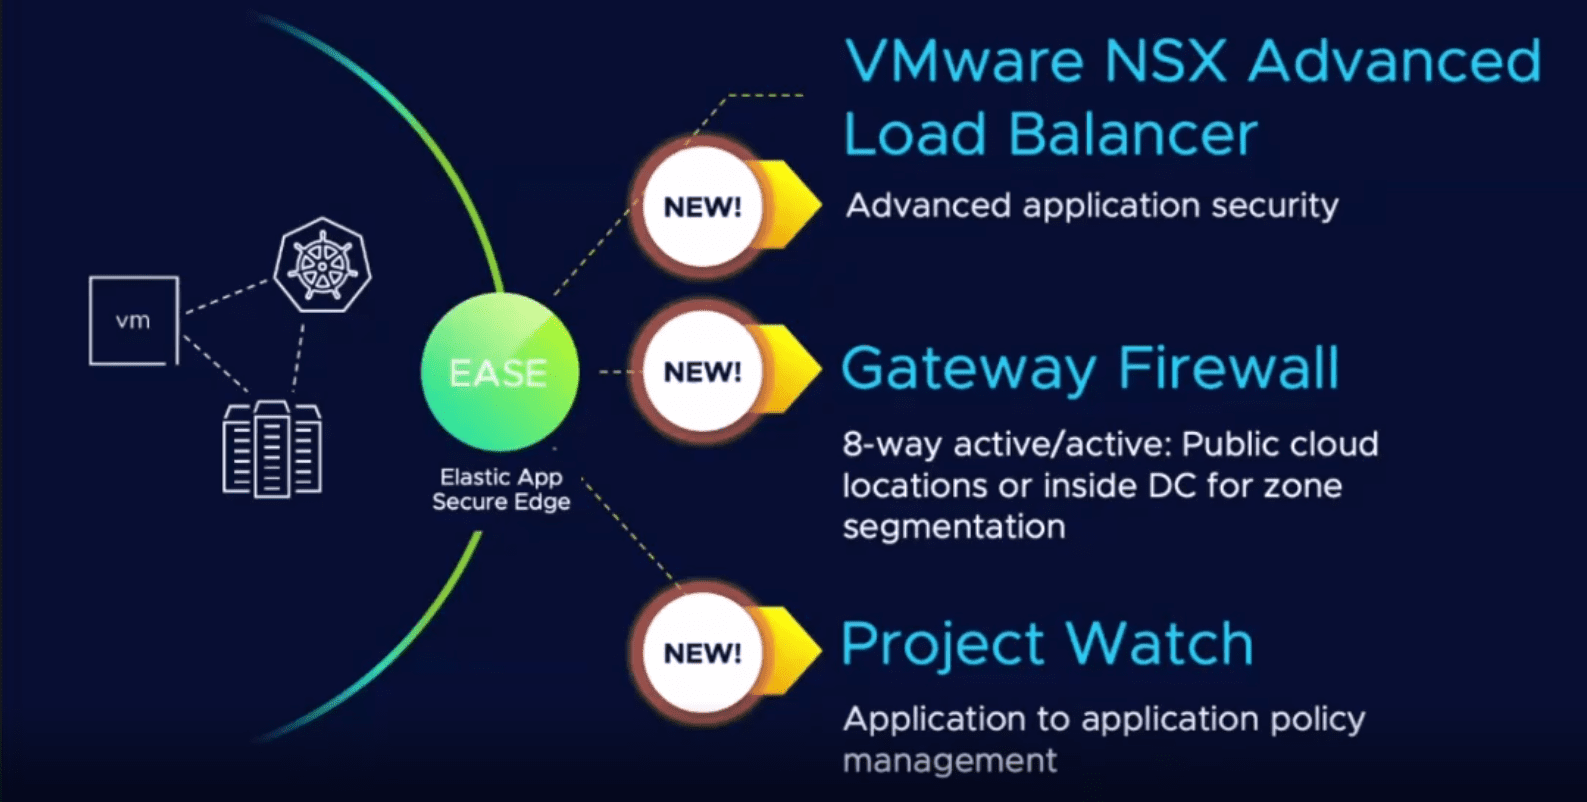 New load balancer and gateway firewall features announced at VMware Explore 2022